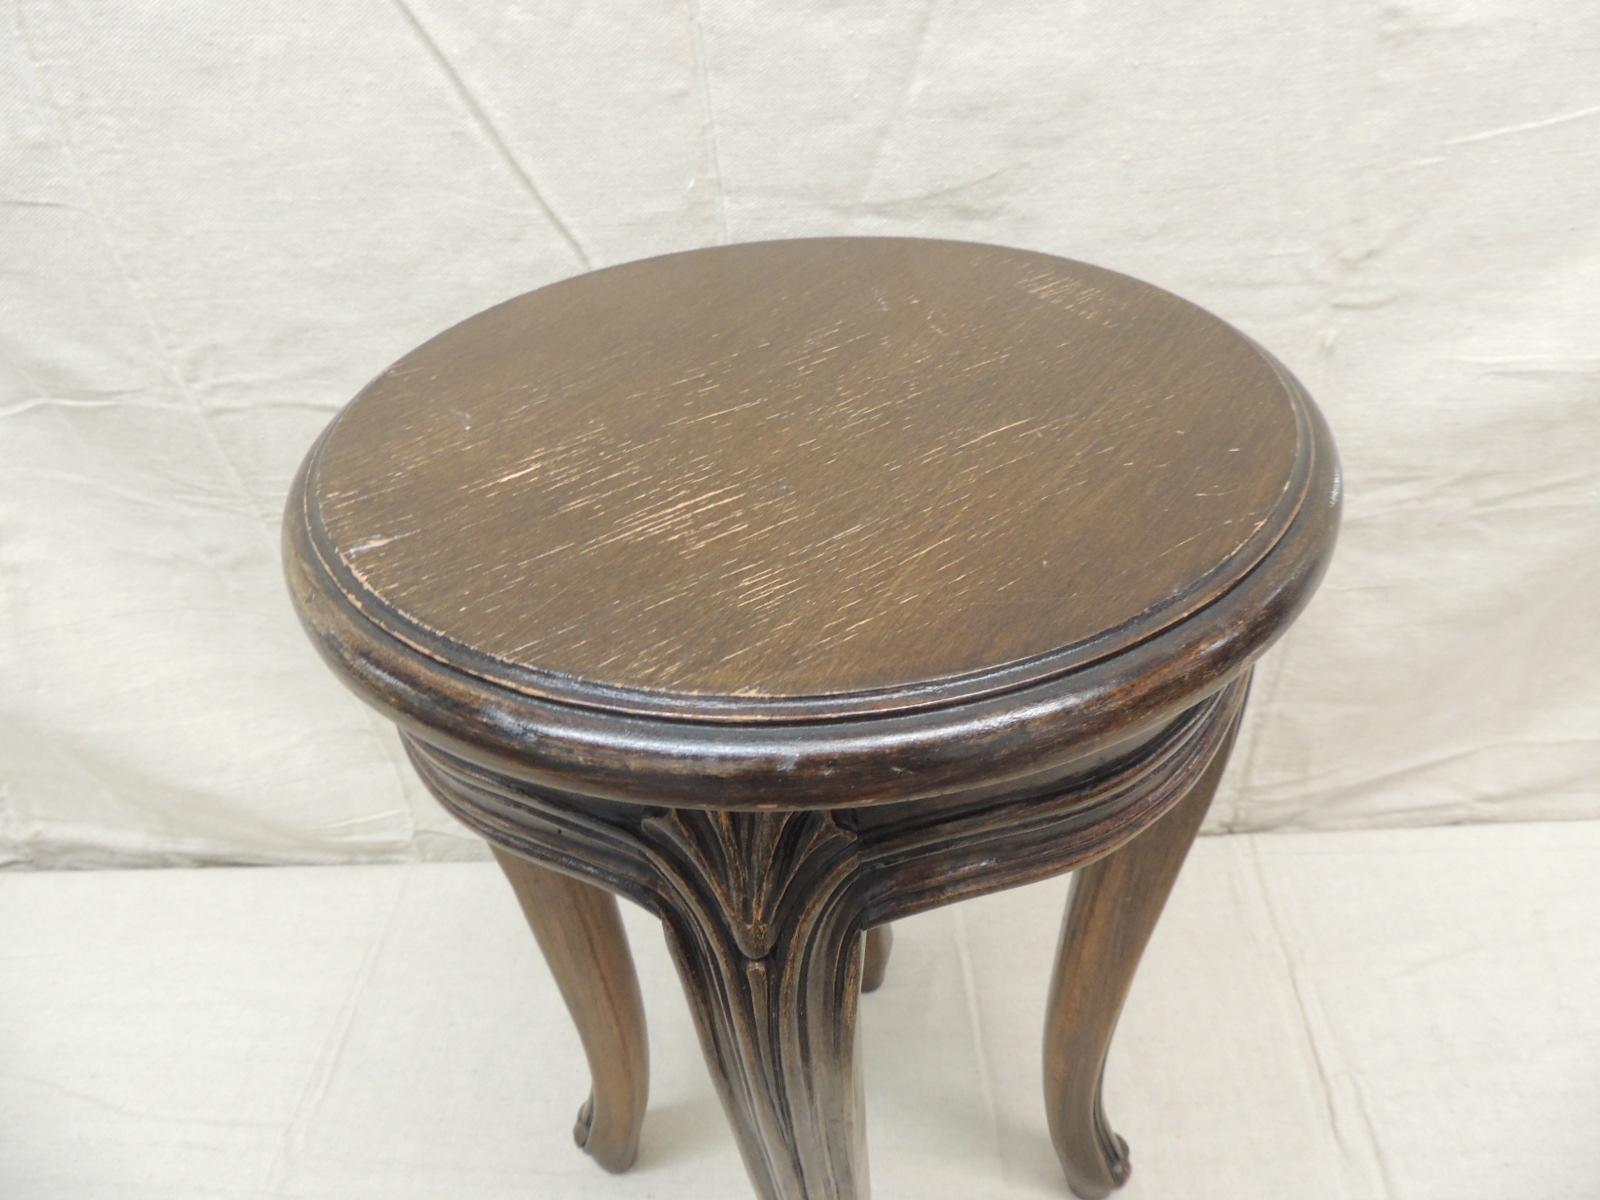 Vintage round tabouret Louis XV style legs
Dark stained wood. Small stool or drinks table with four cabriolet legs
Size: 12